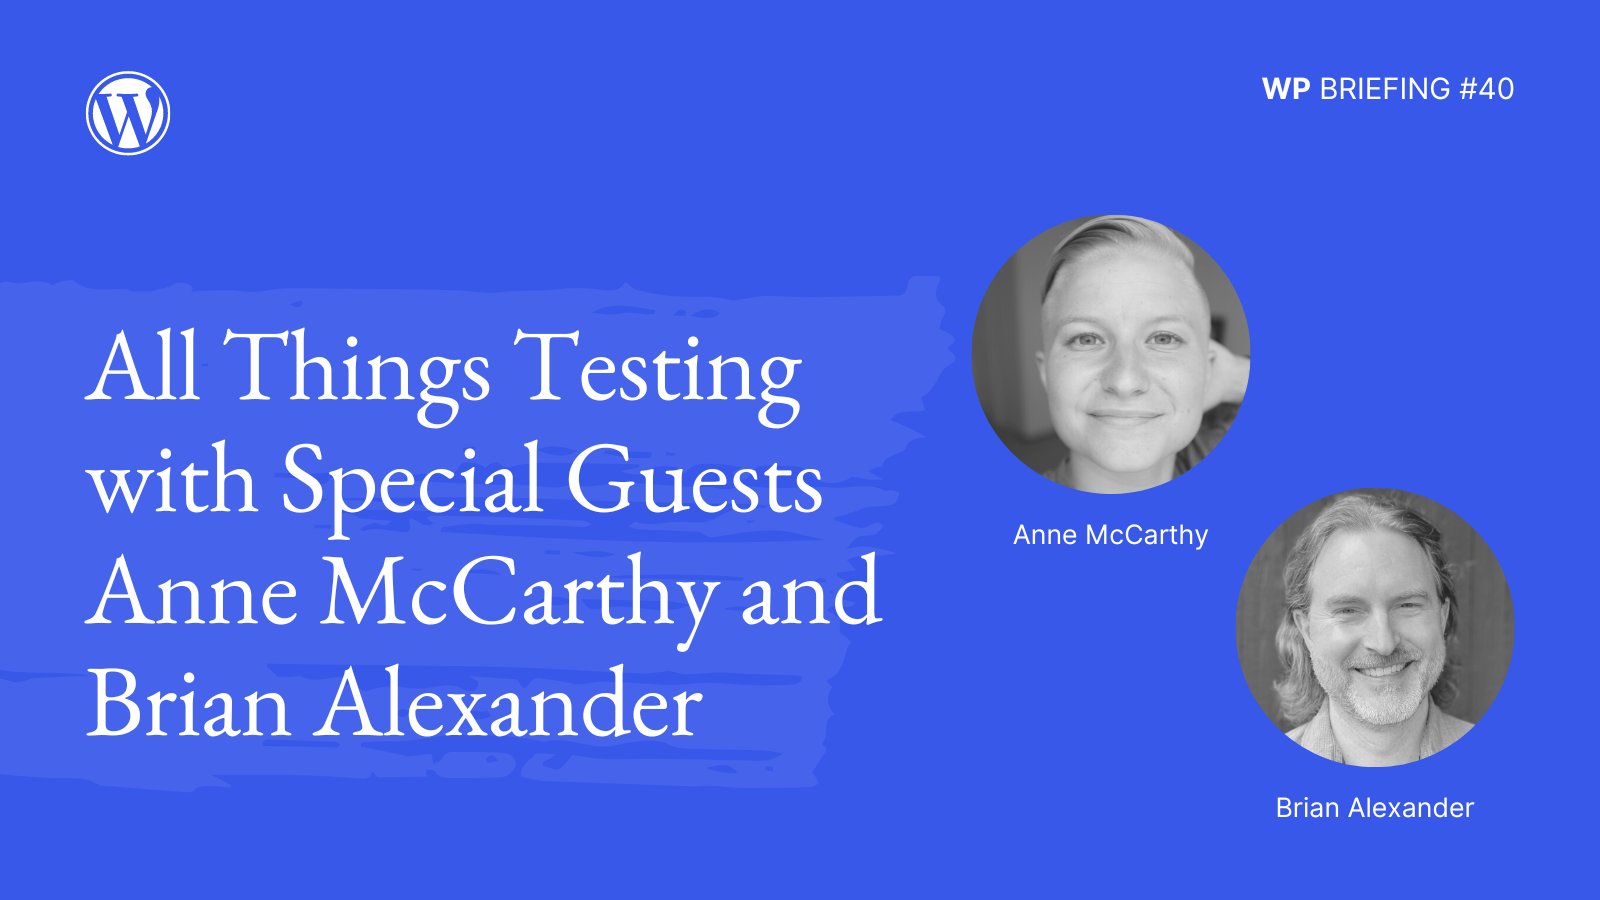 Blue background with brush stroke detail and images of Anne McCarthy and Brian Alexander. Text: "WP Briefing #40. All things testing with special guests Anne McCarthy and Brian Alexander."